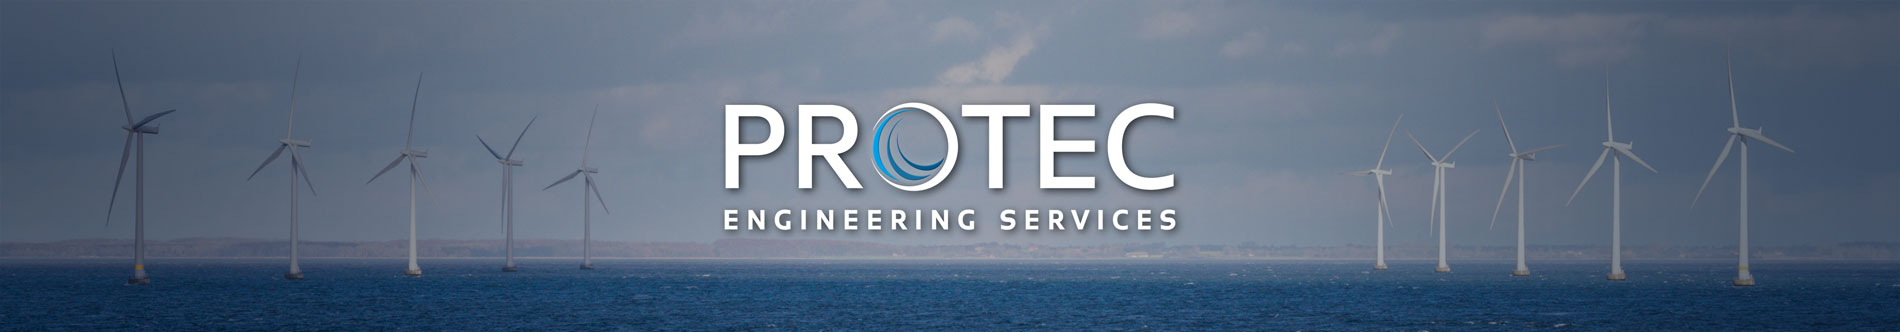 Protec-Engineering-Services